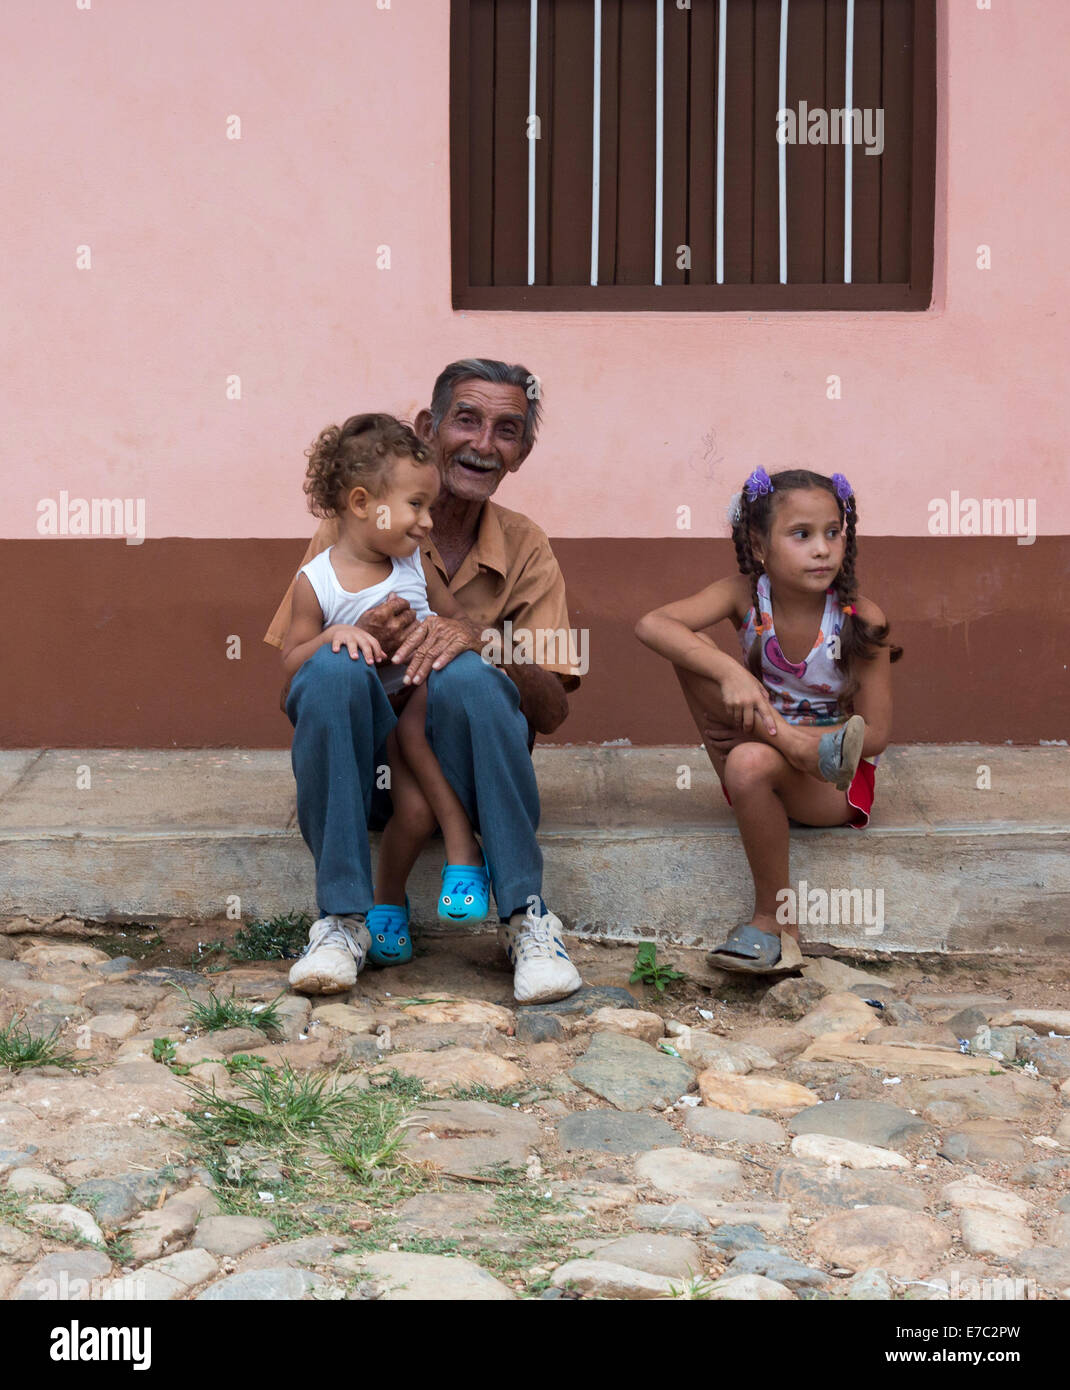 old man with two young children, Trinidad, Cuba Stock Photo